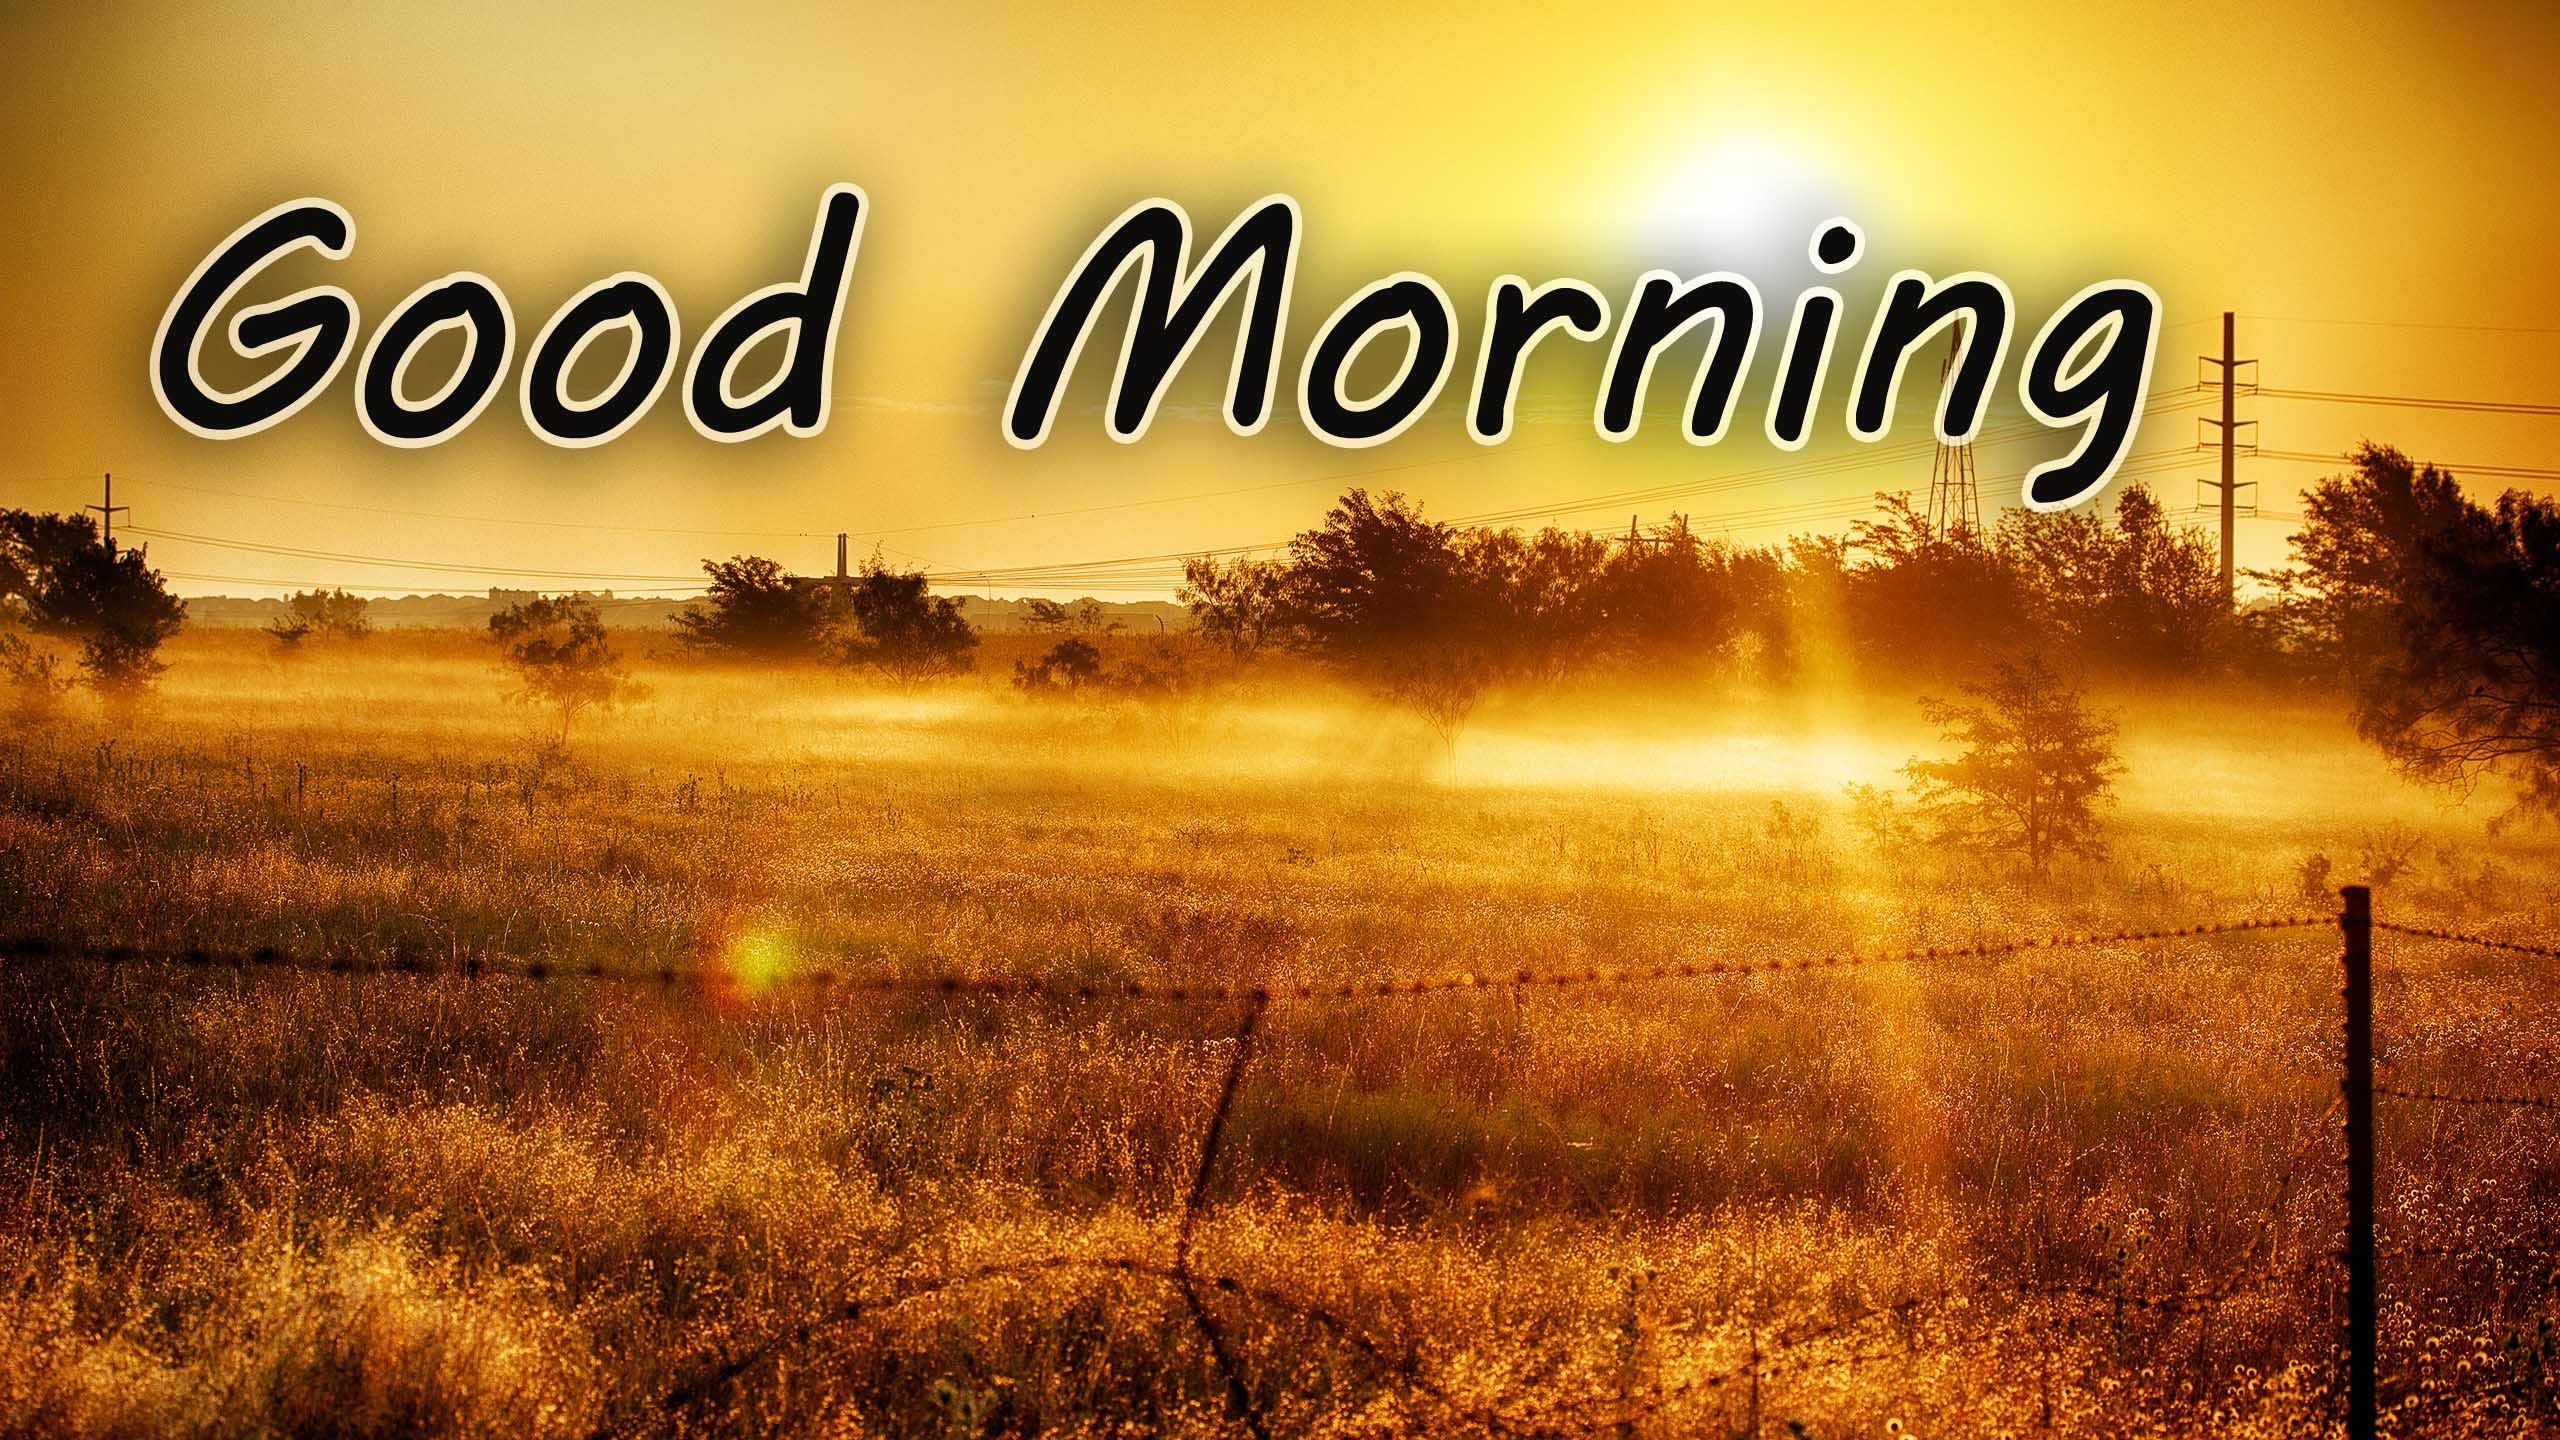 Good Morning HD Wallpaper and Image Download Free